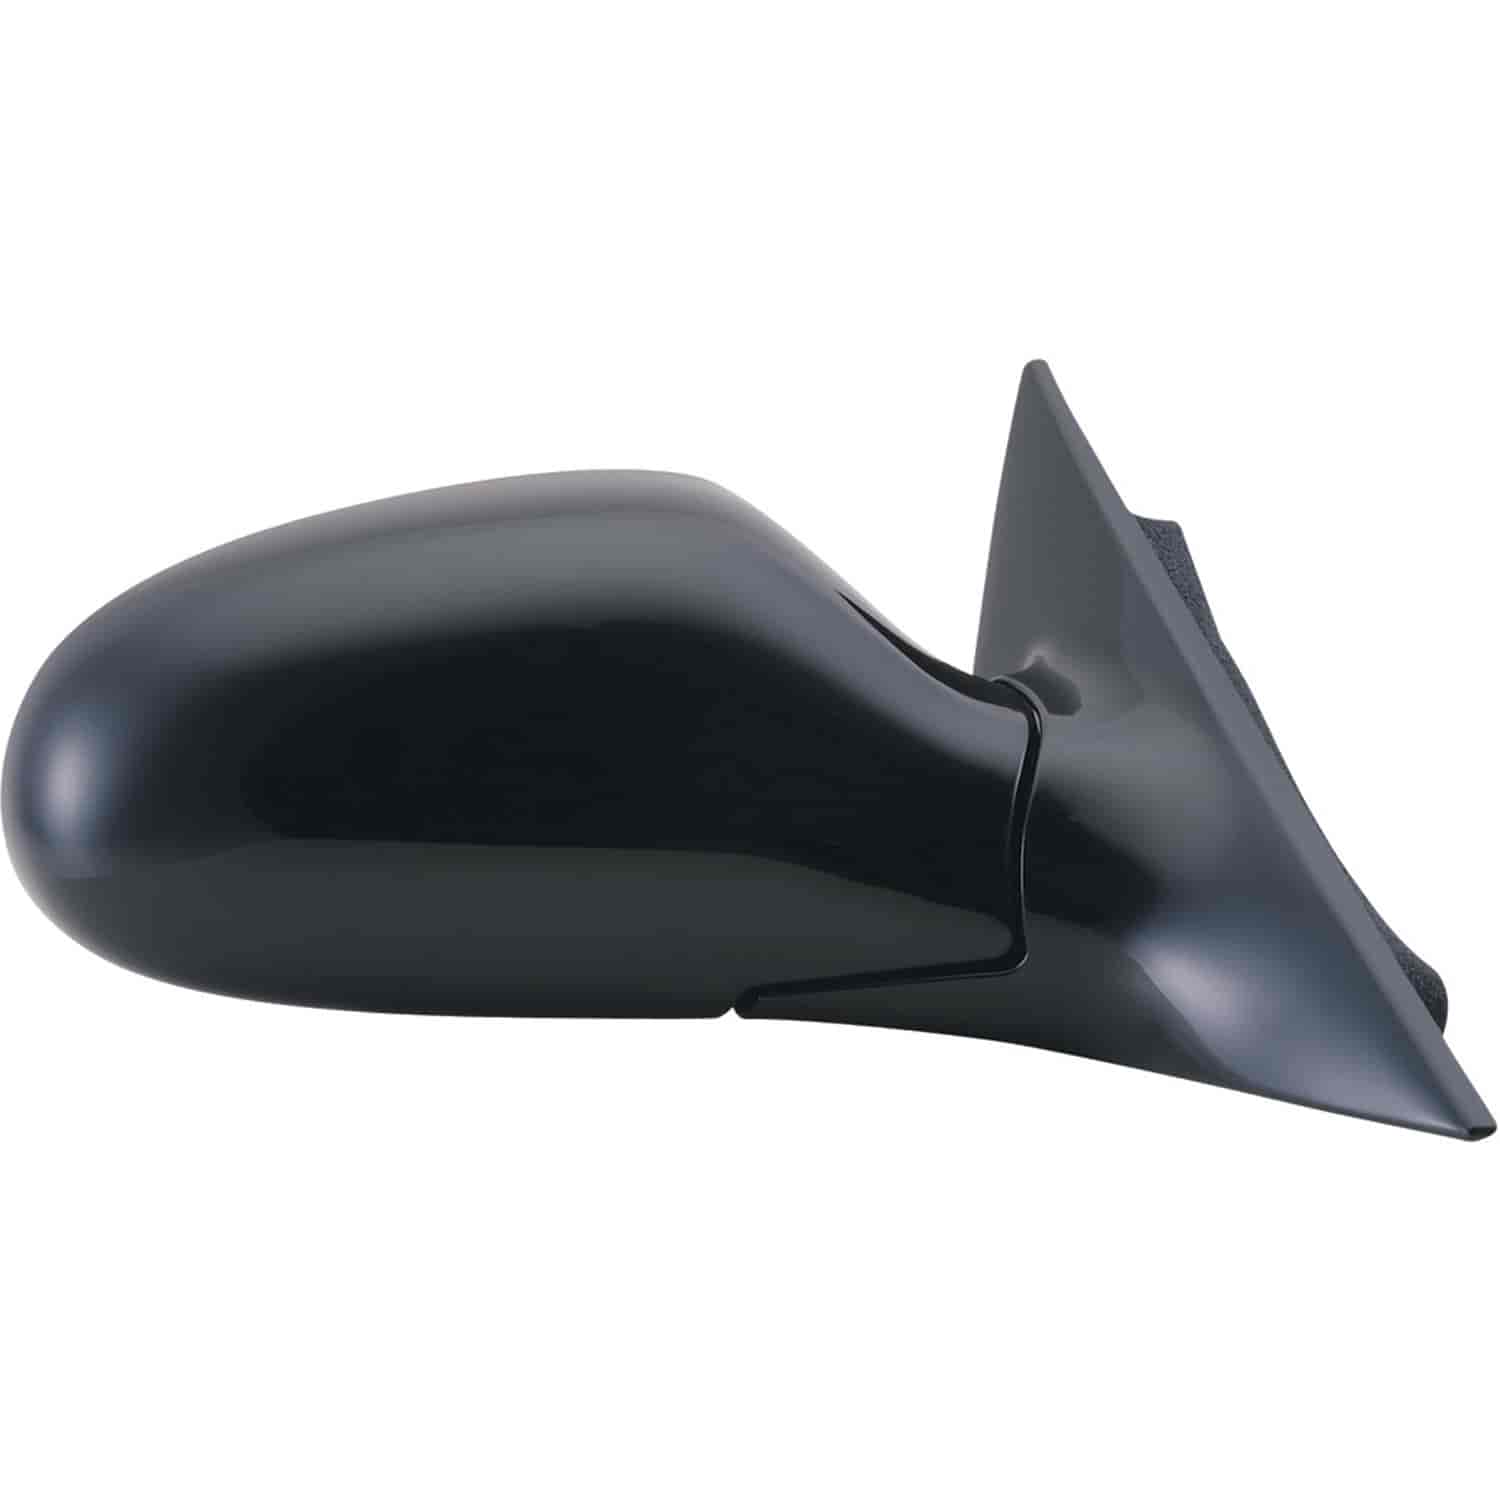 OEM Style Replacement mirror for 96-00 Chrysler Sebring Convertible passenger side mirror tested to